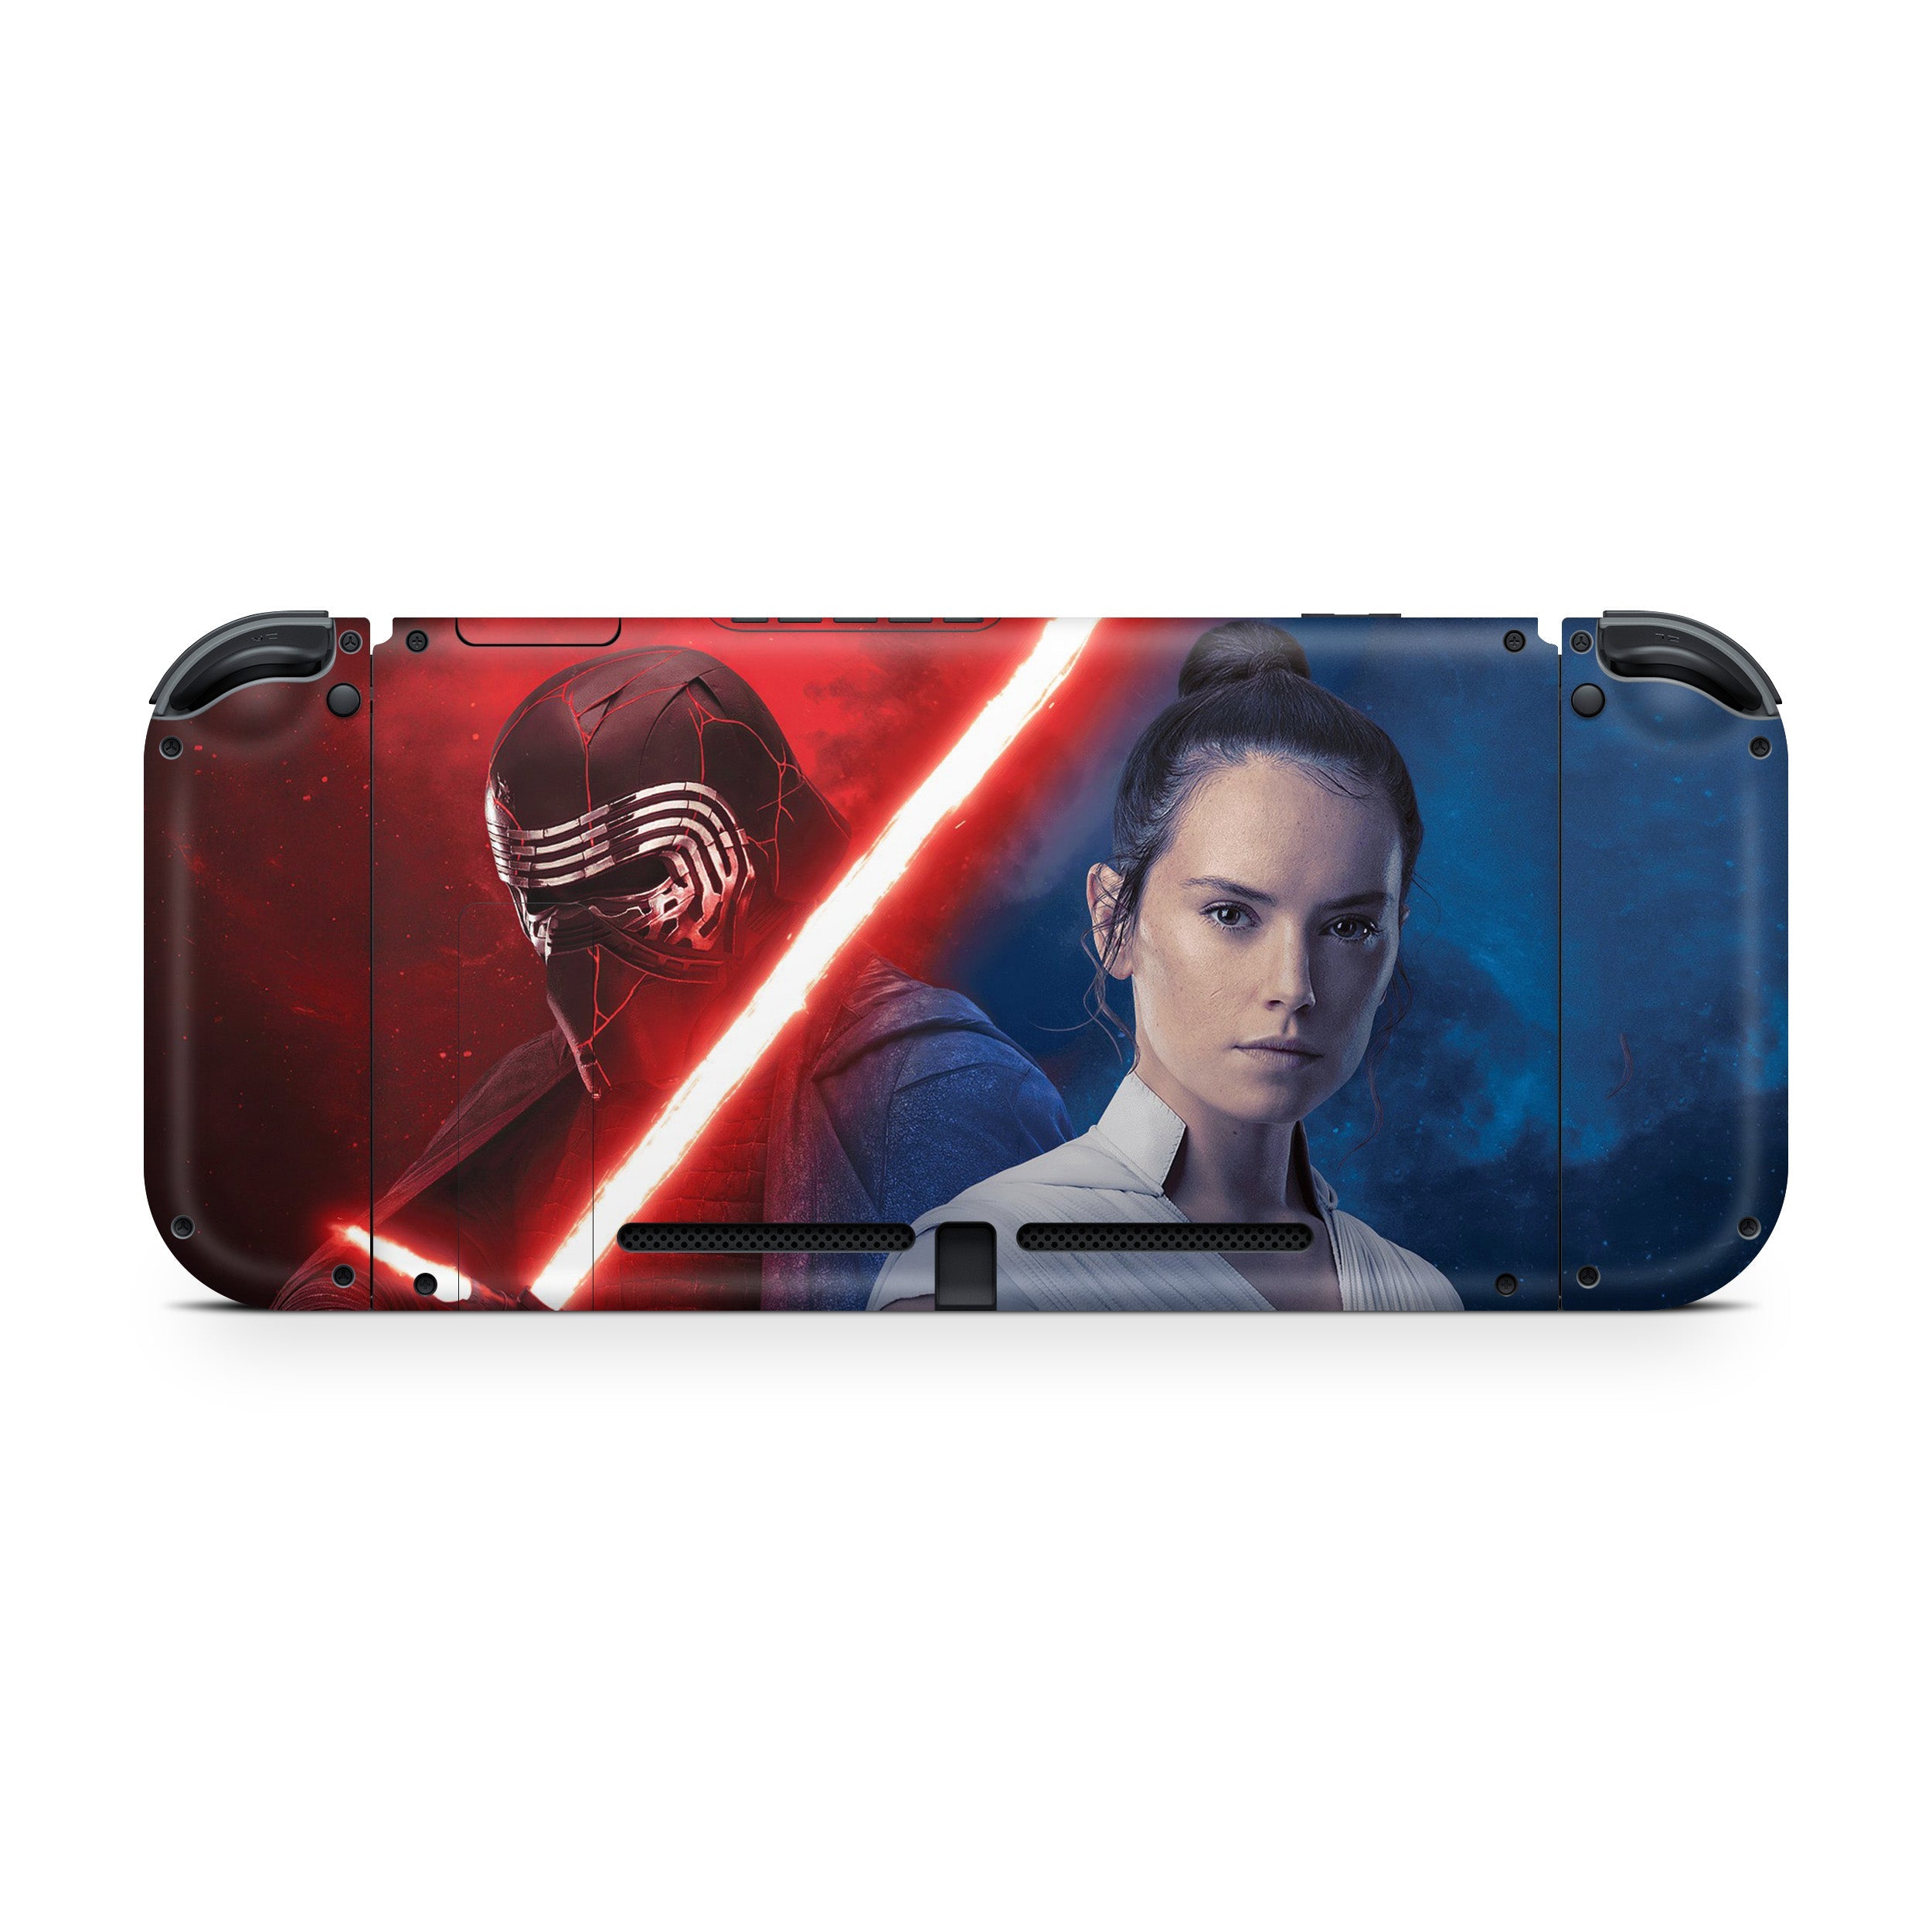 A video game skin featuring a Star Wars design for the Nintendo Switch.